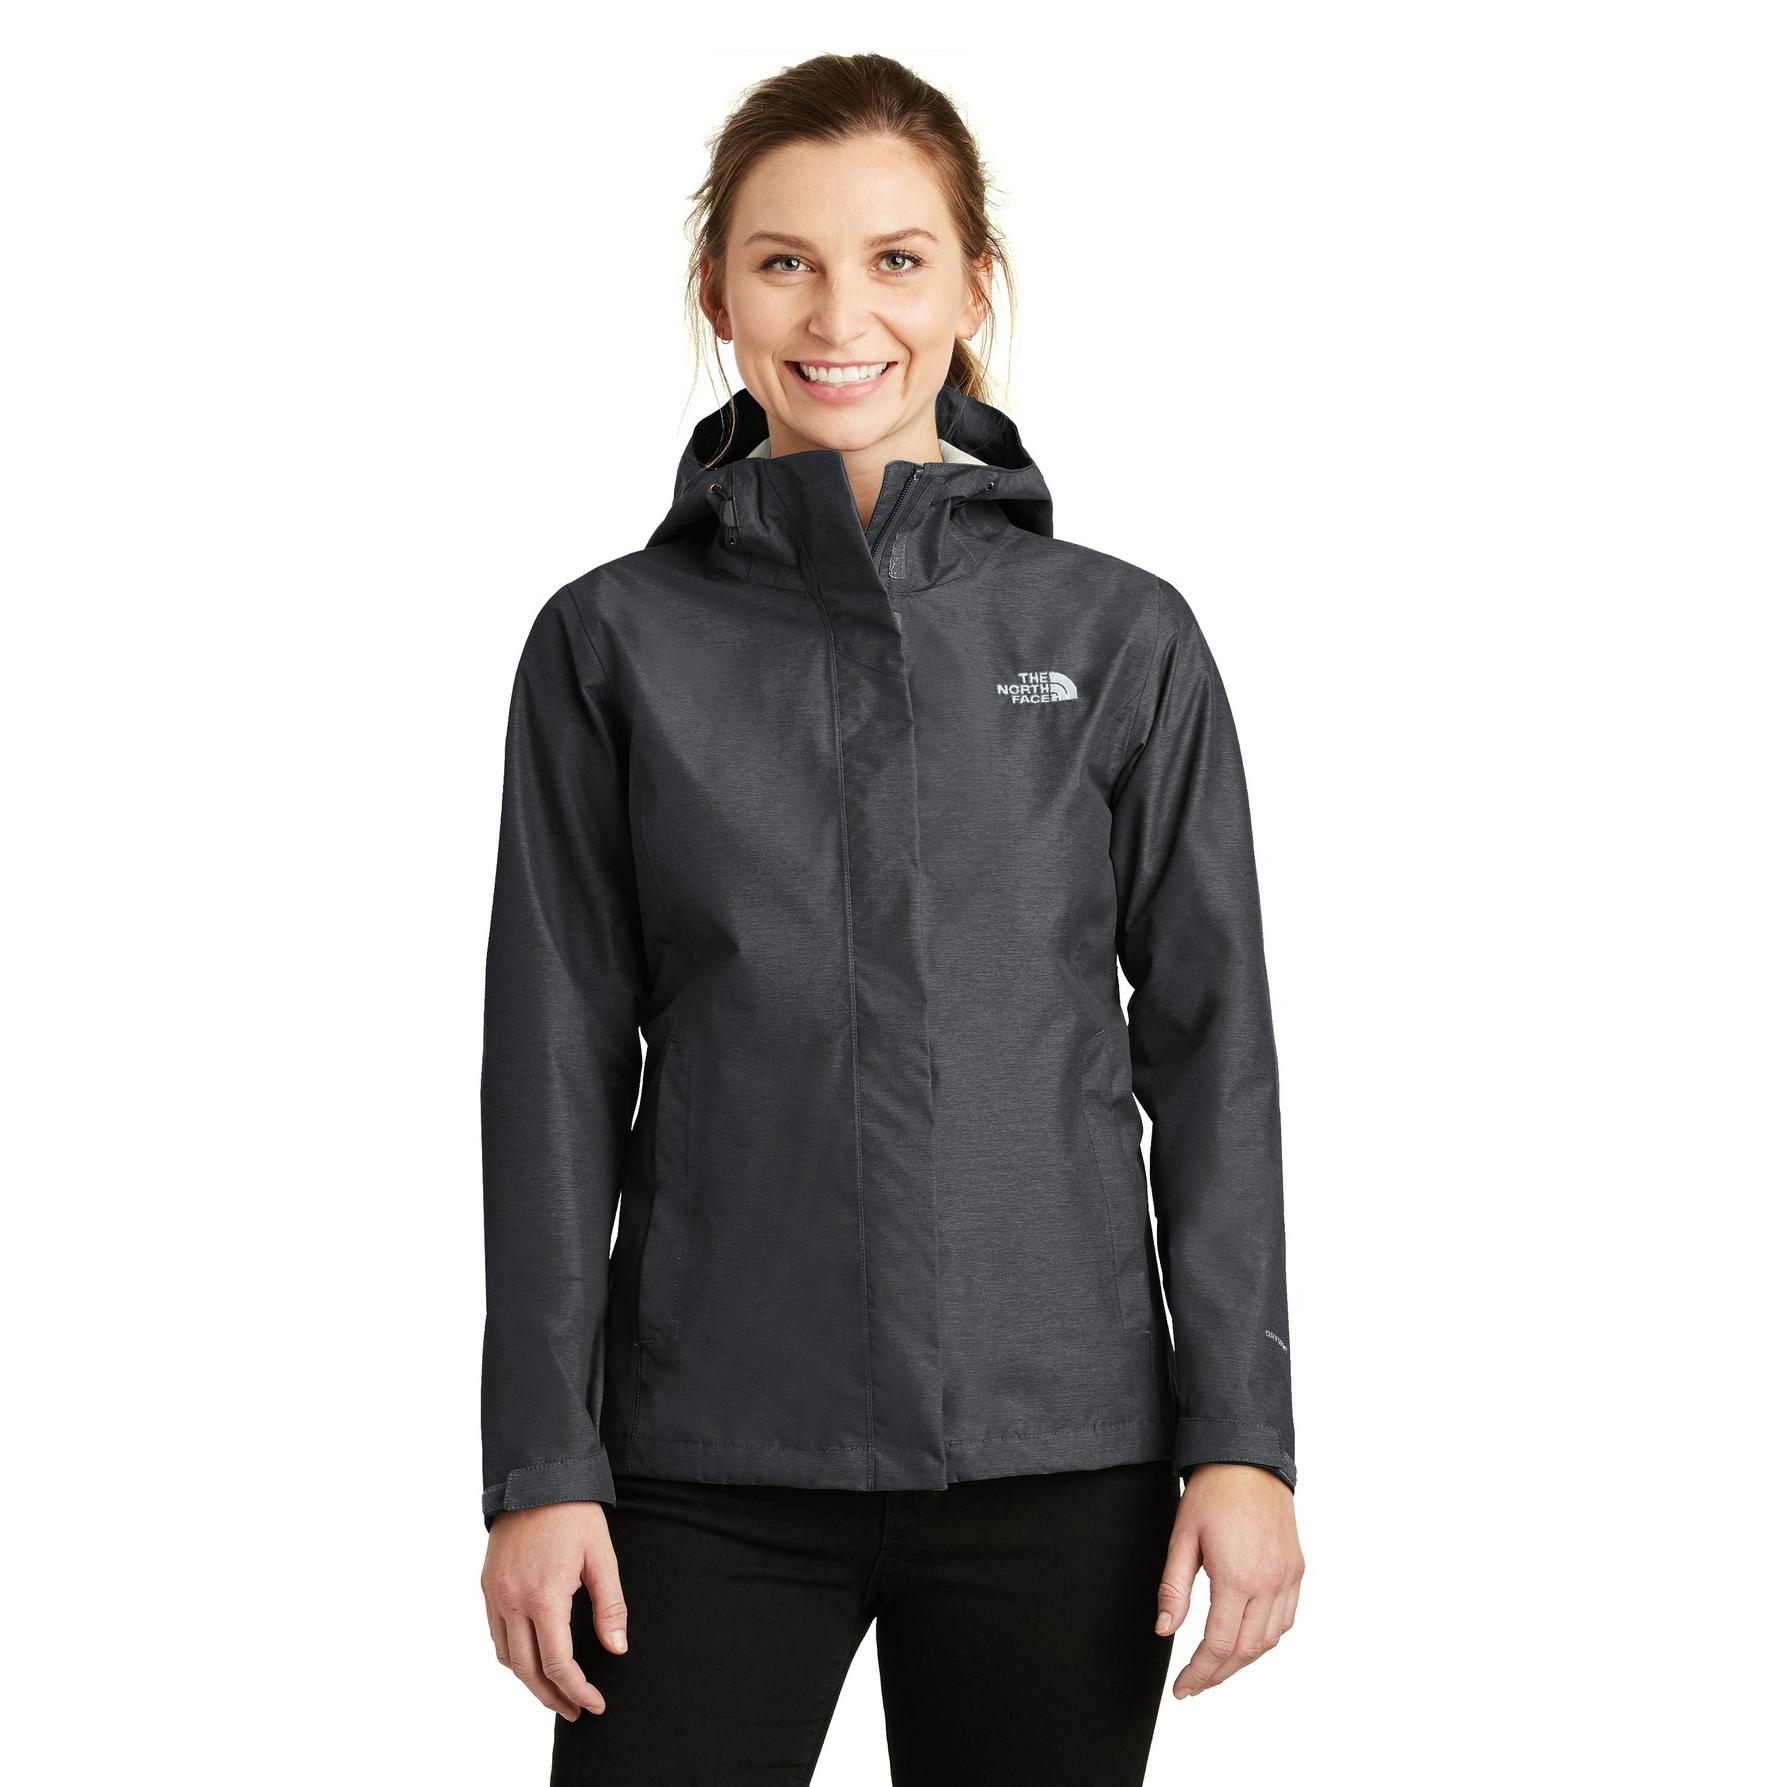 The North Face NF0A3LH5 Ladies DryVent 